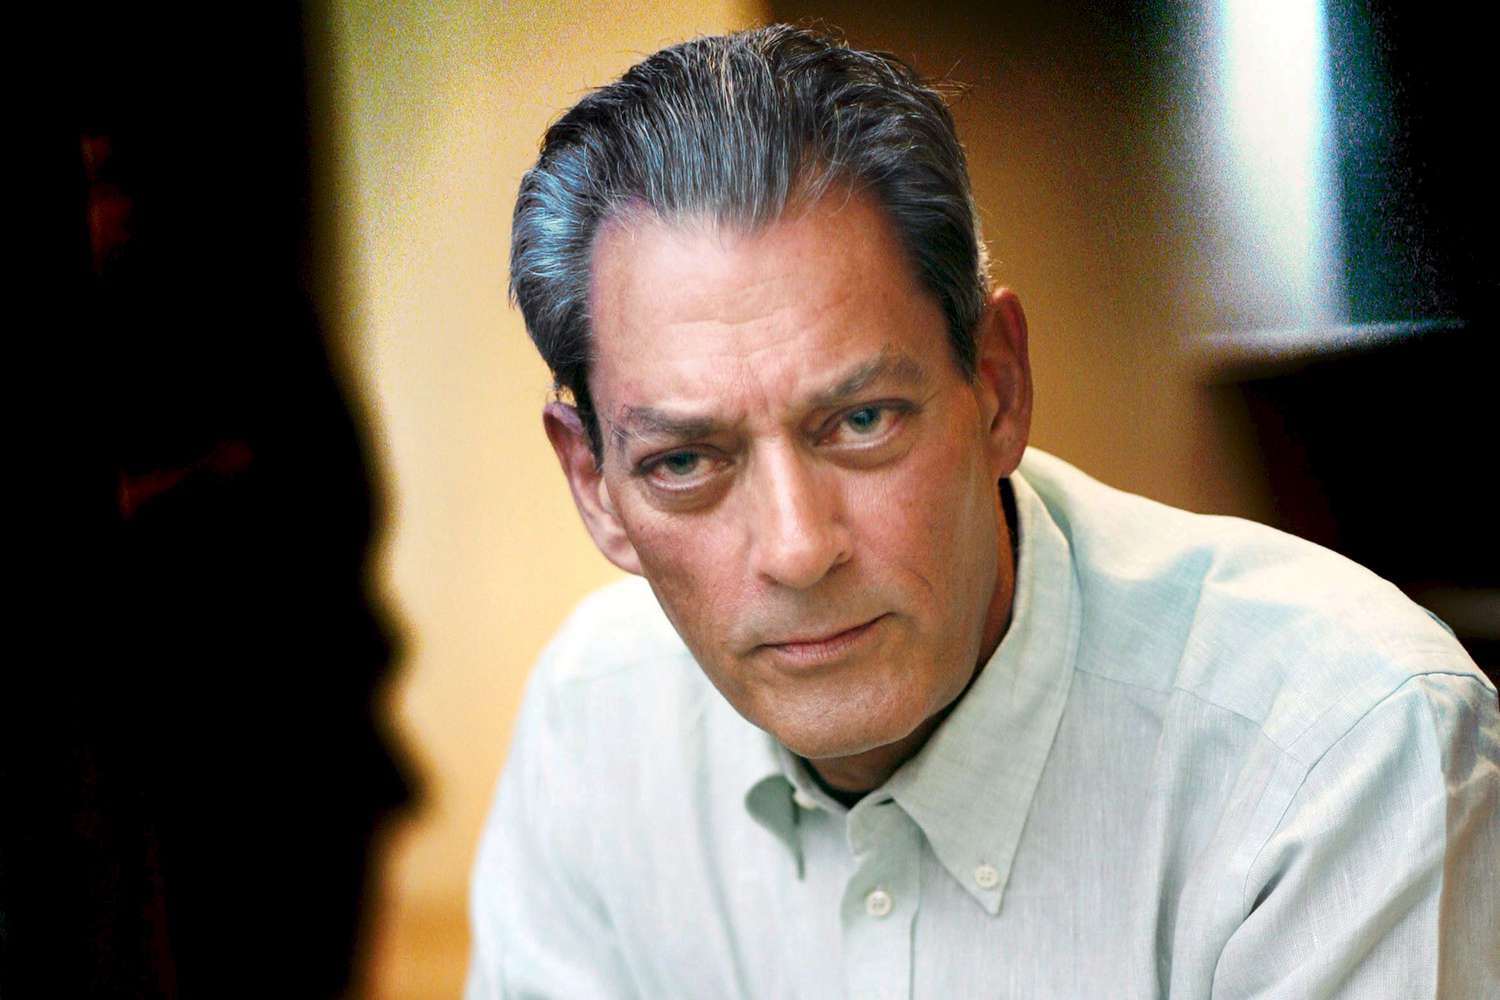 Paul Auster, Author of ‘The New York Trilogy,’ Dead at 77 [Video]